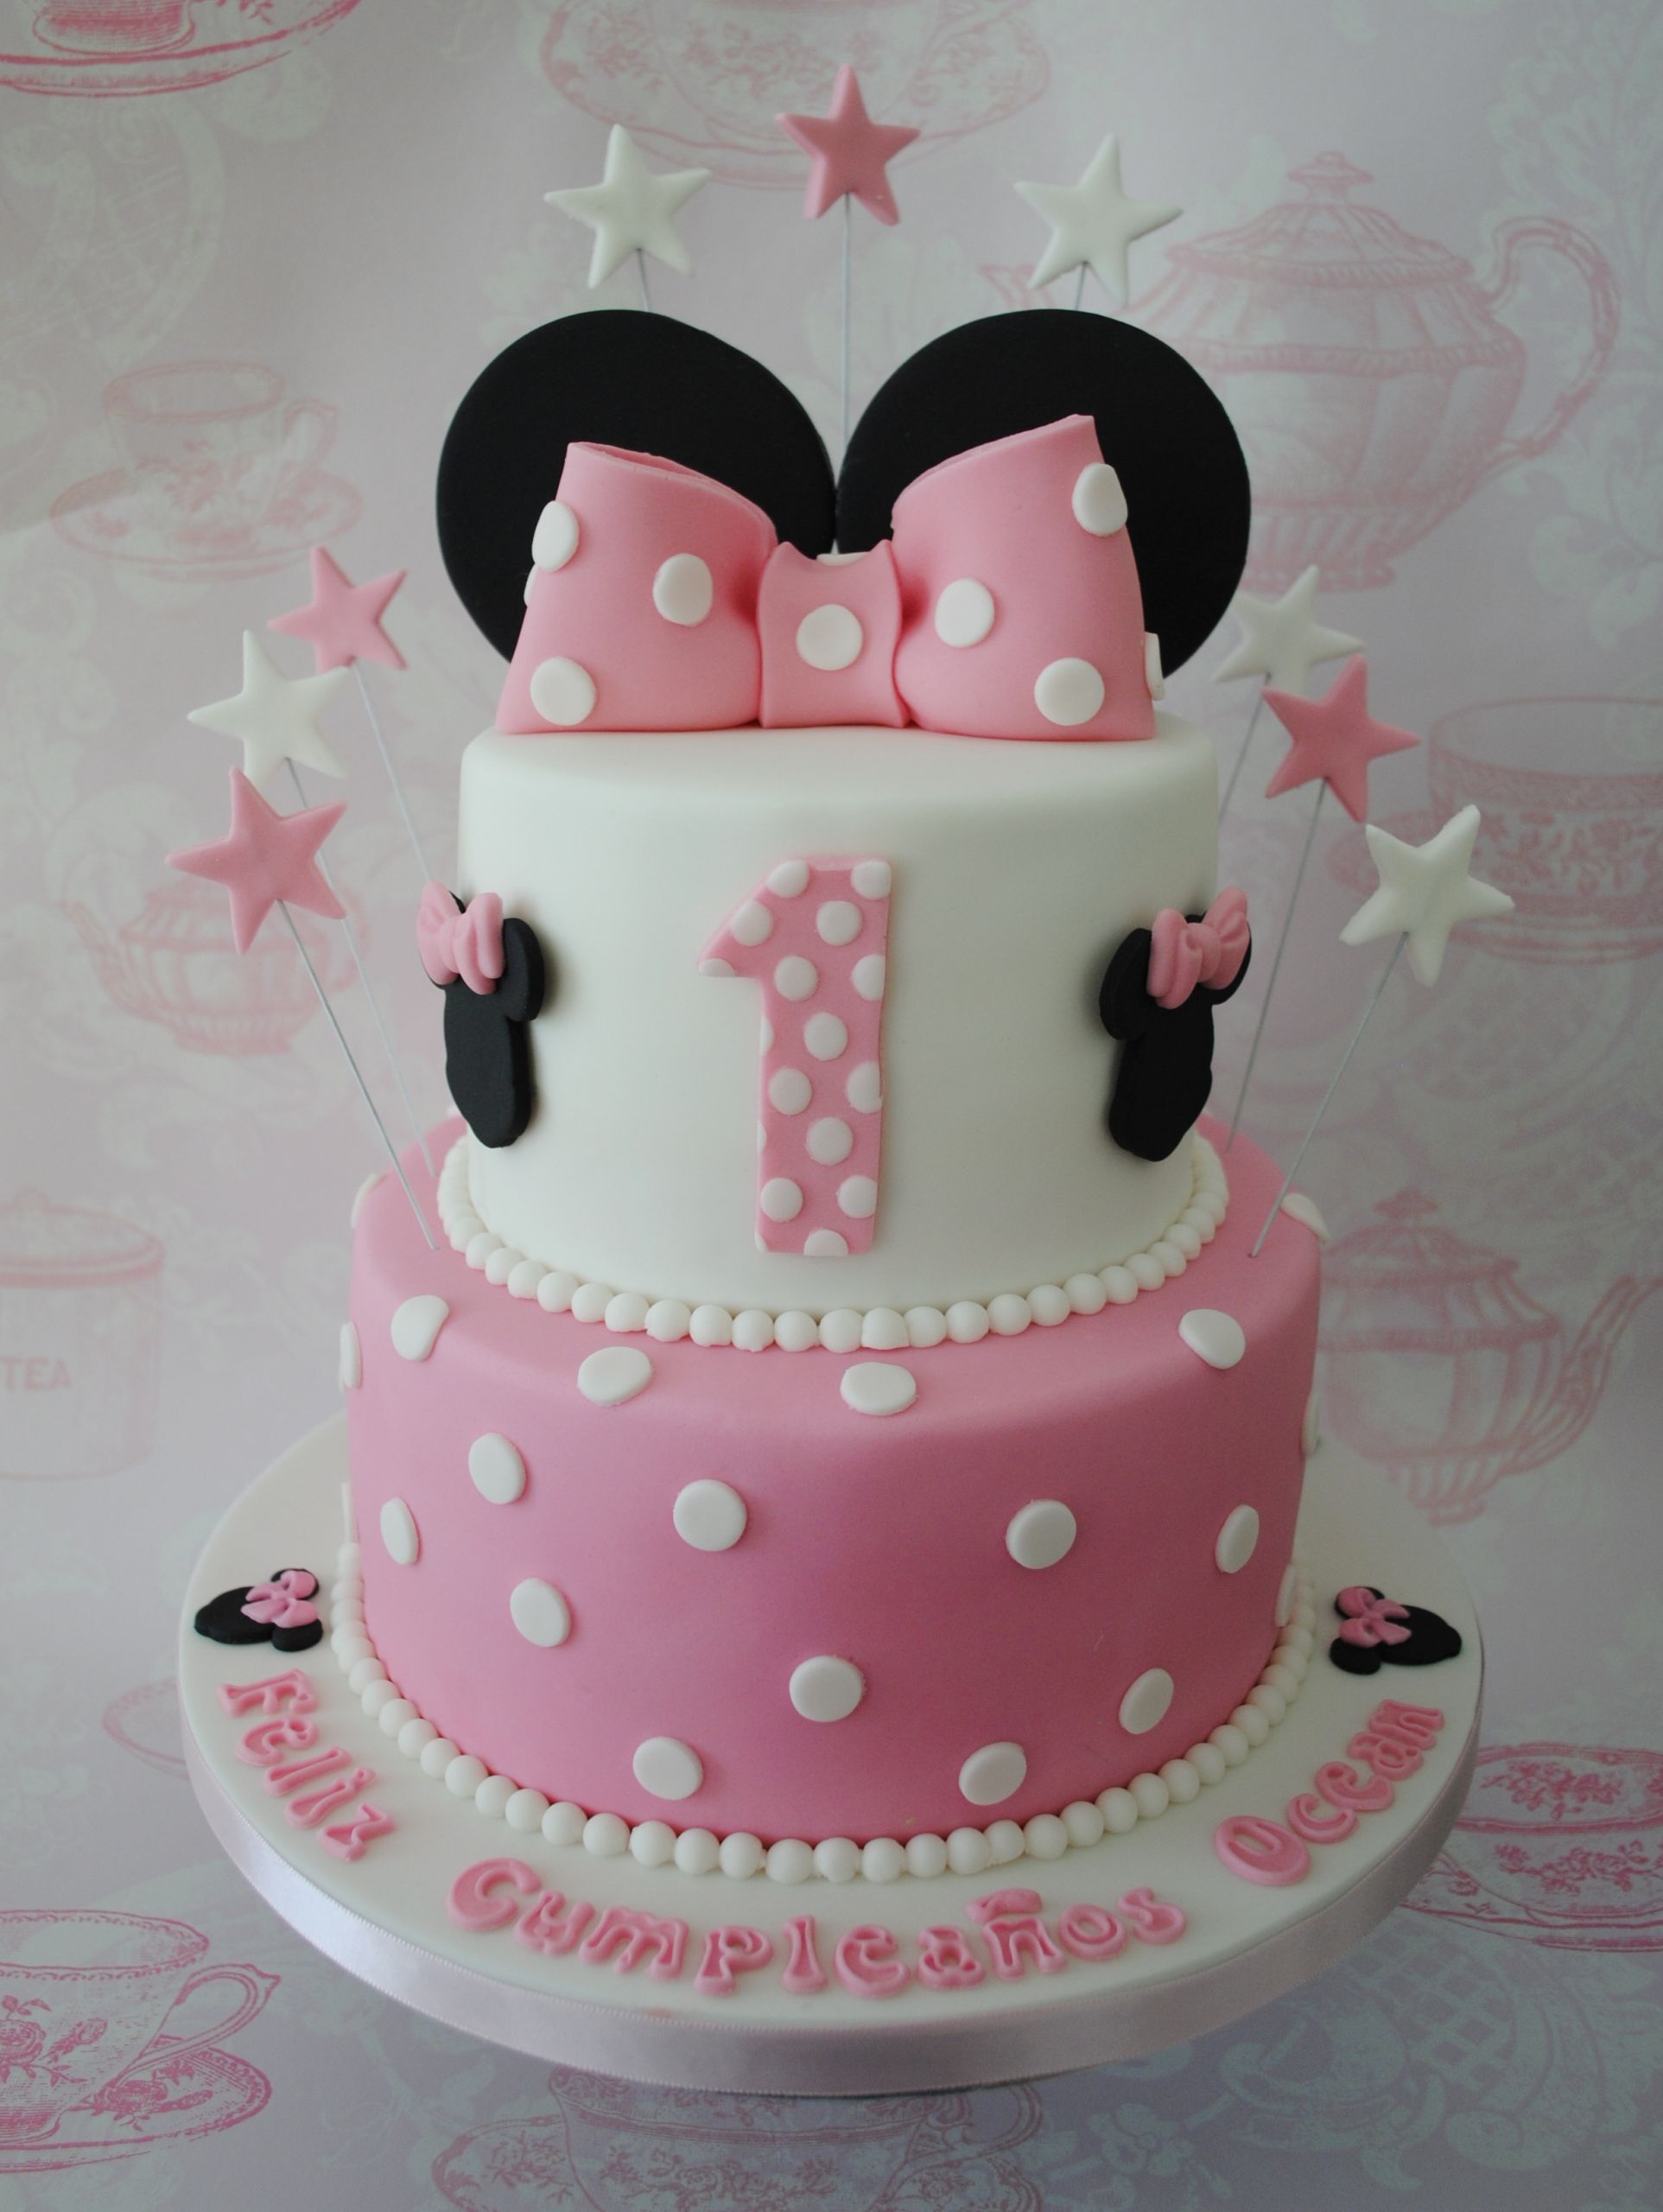 Minnie Mouse 1st Birthday Cake
 Miss Cupcakes Blog Archive 2 tiered Minnie mouse